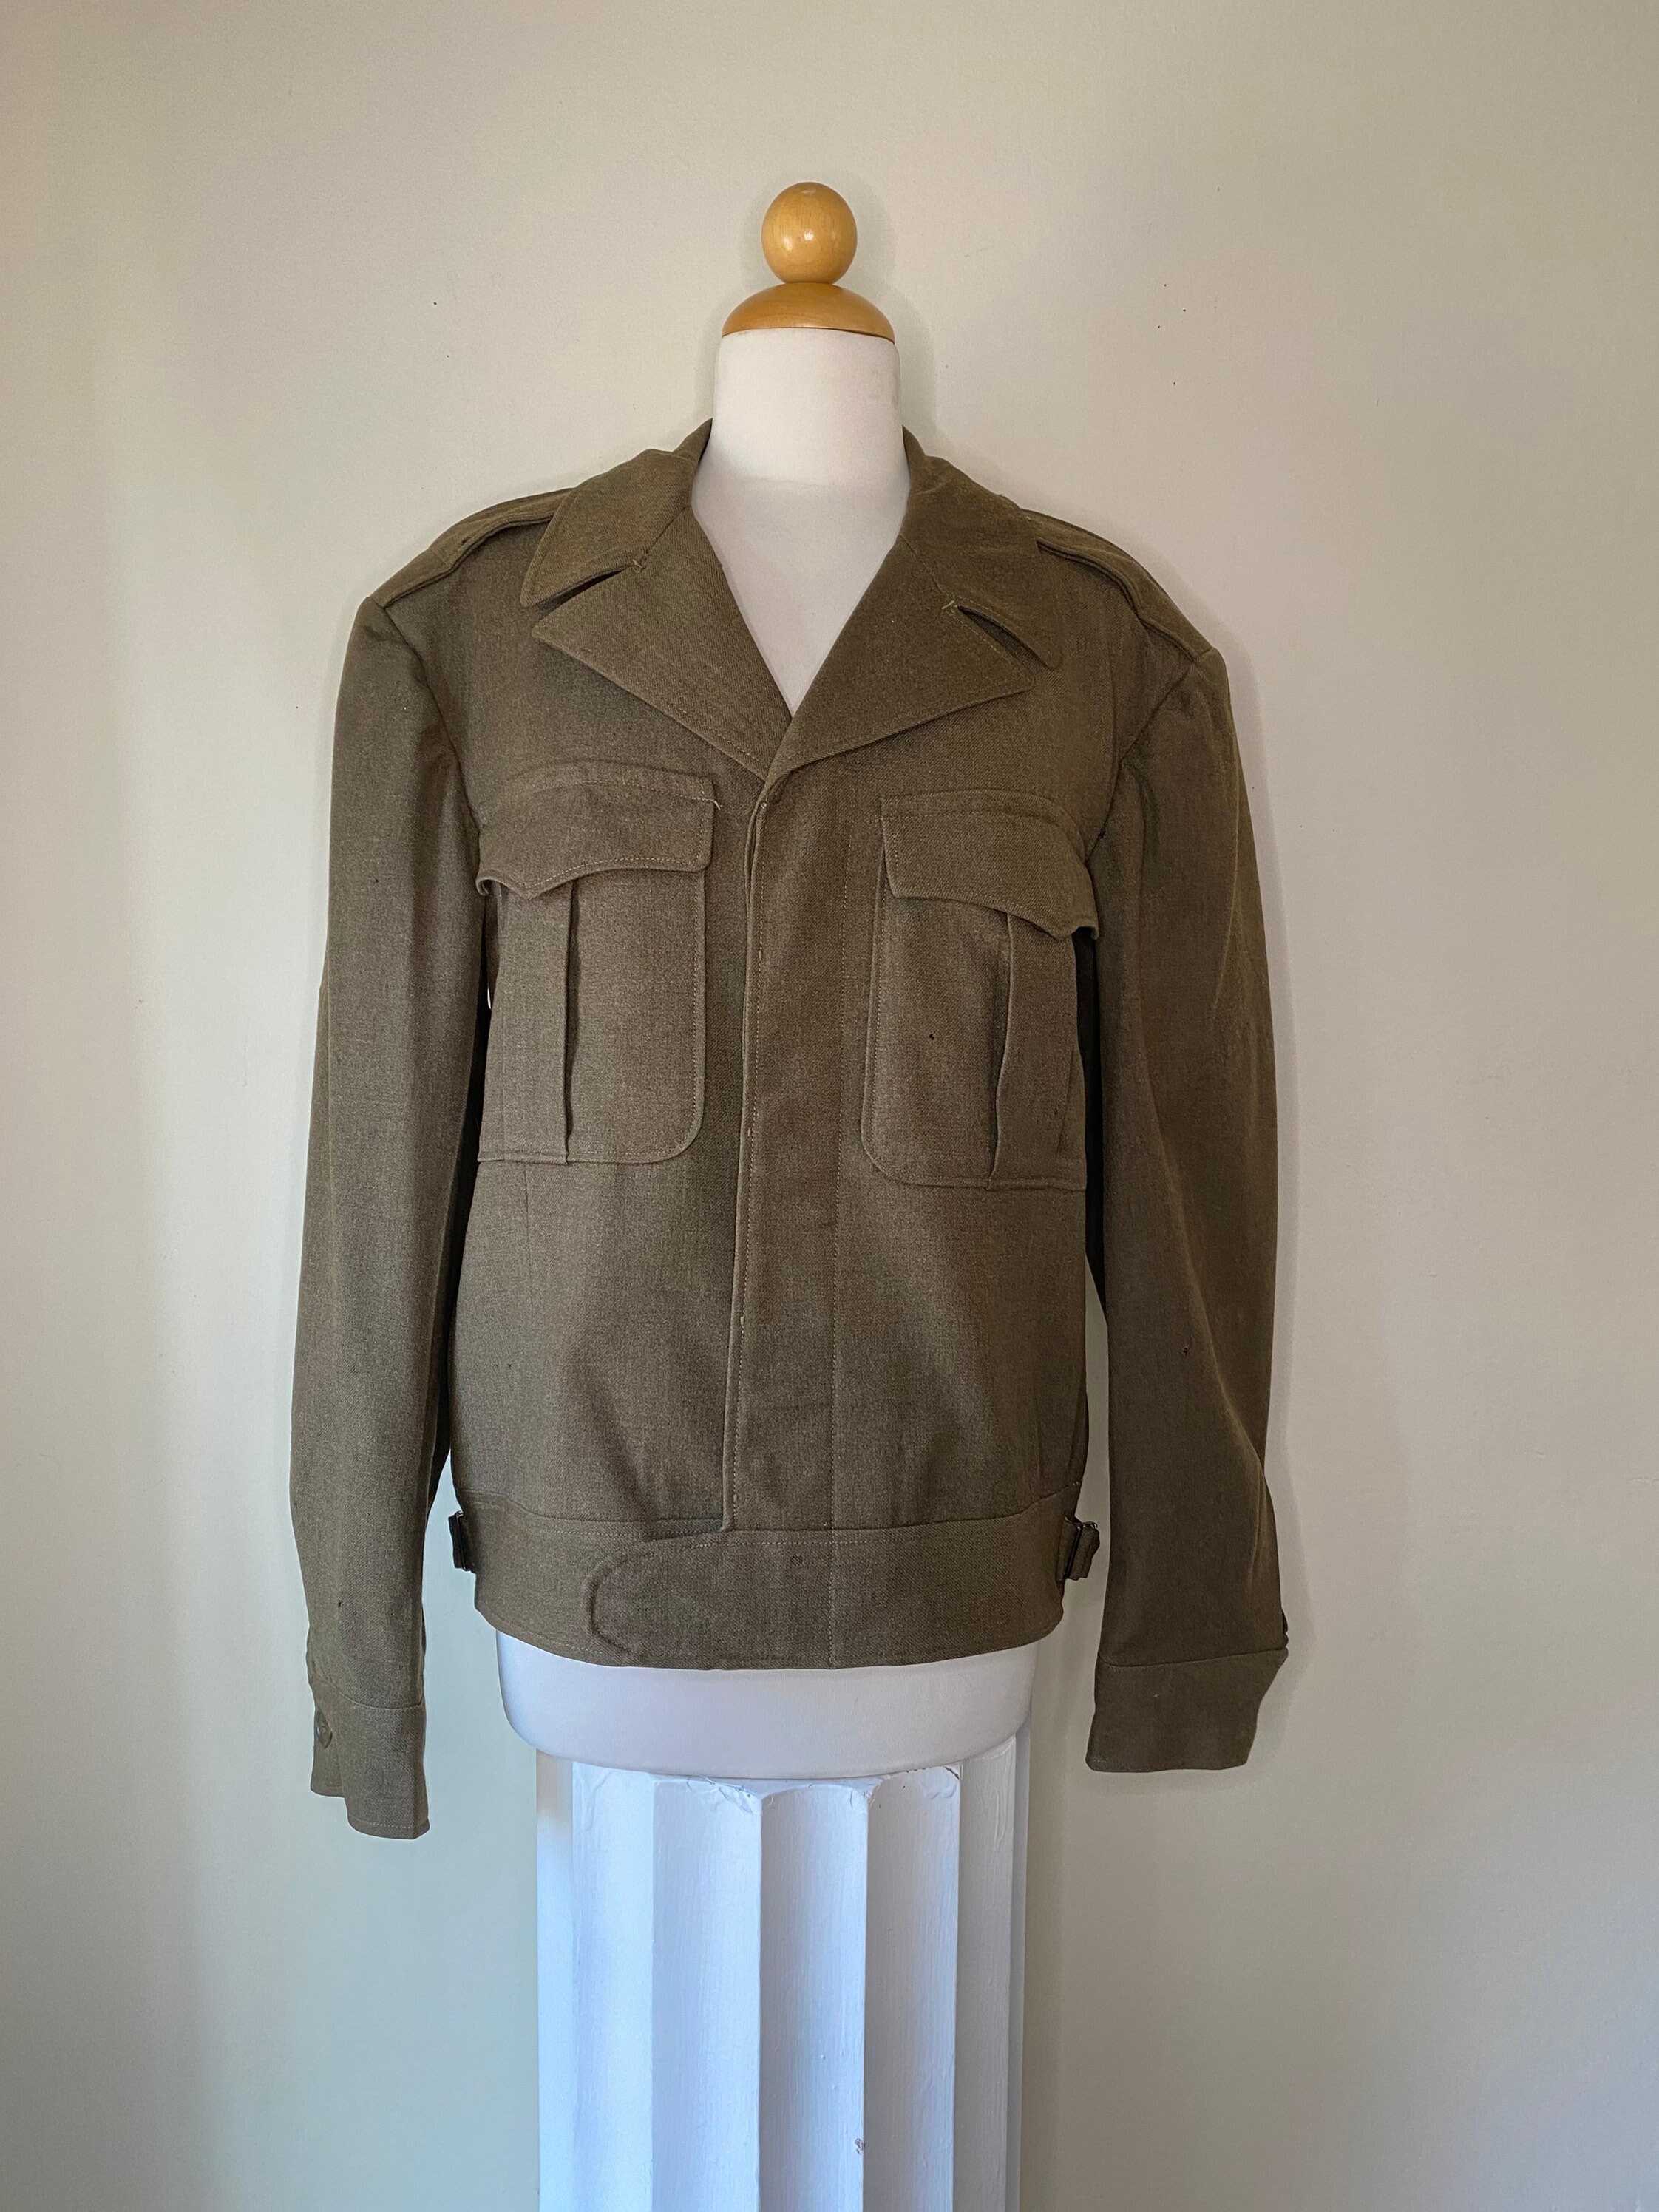 1940s WWII Army Eisenhower Officers Jacket | Etsy